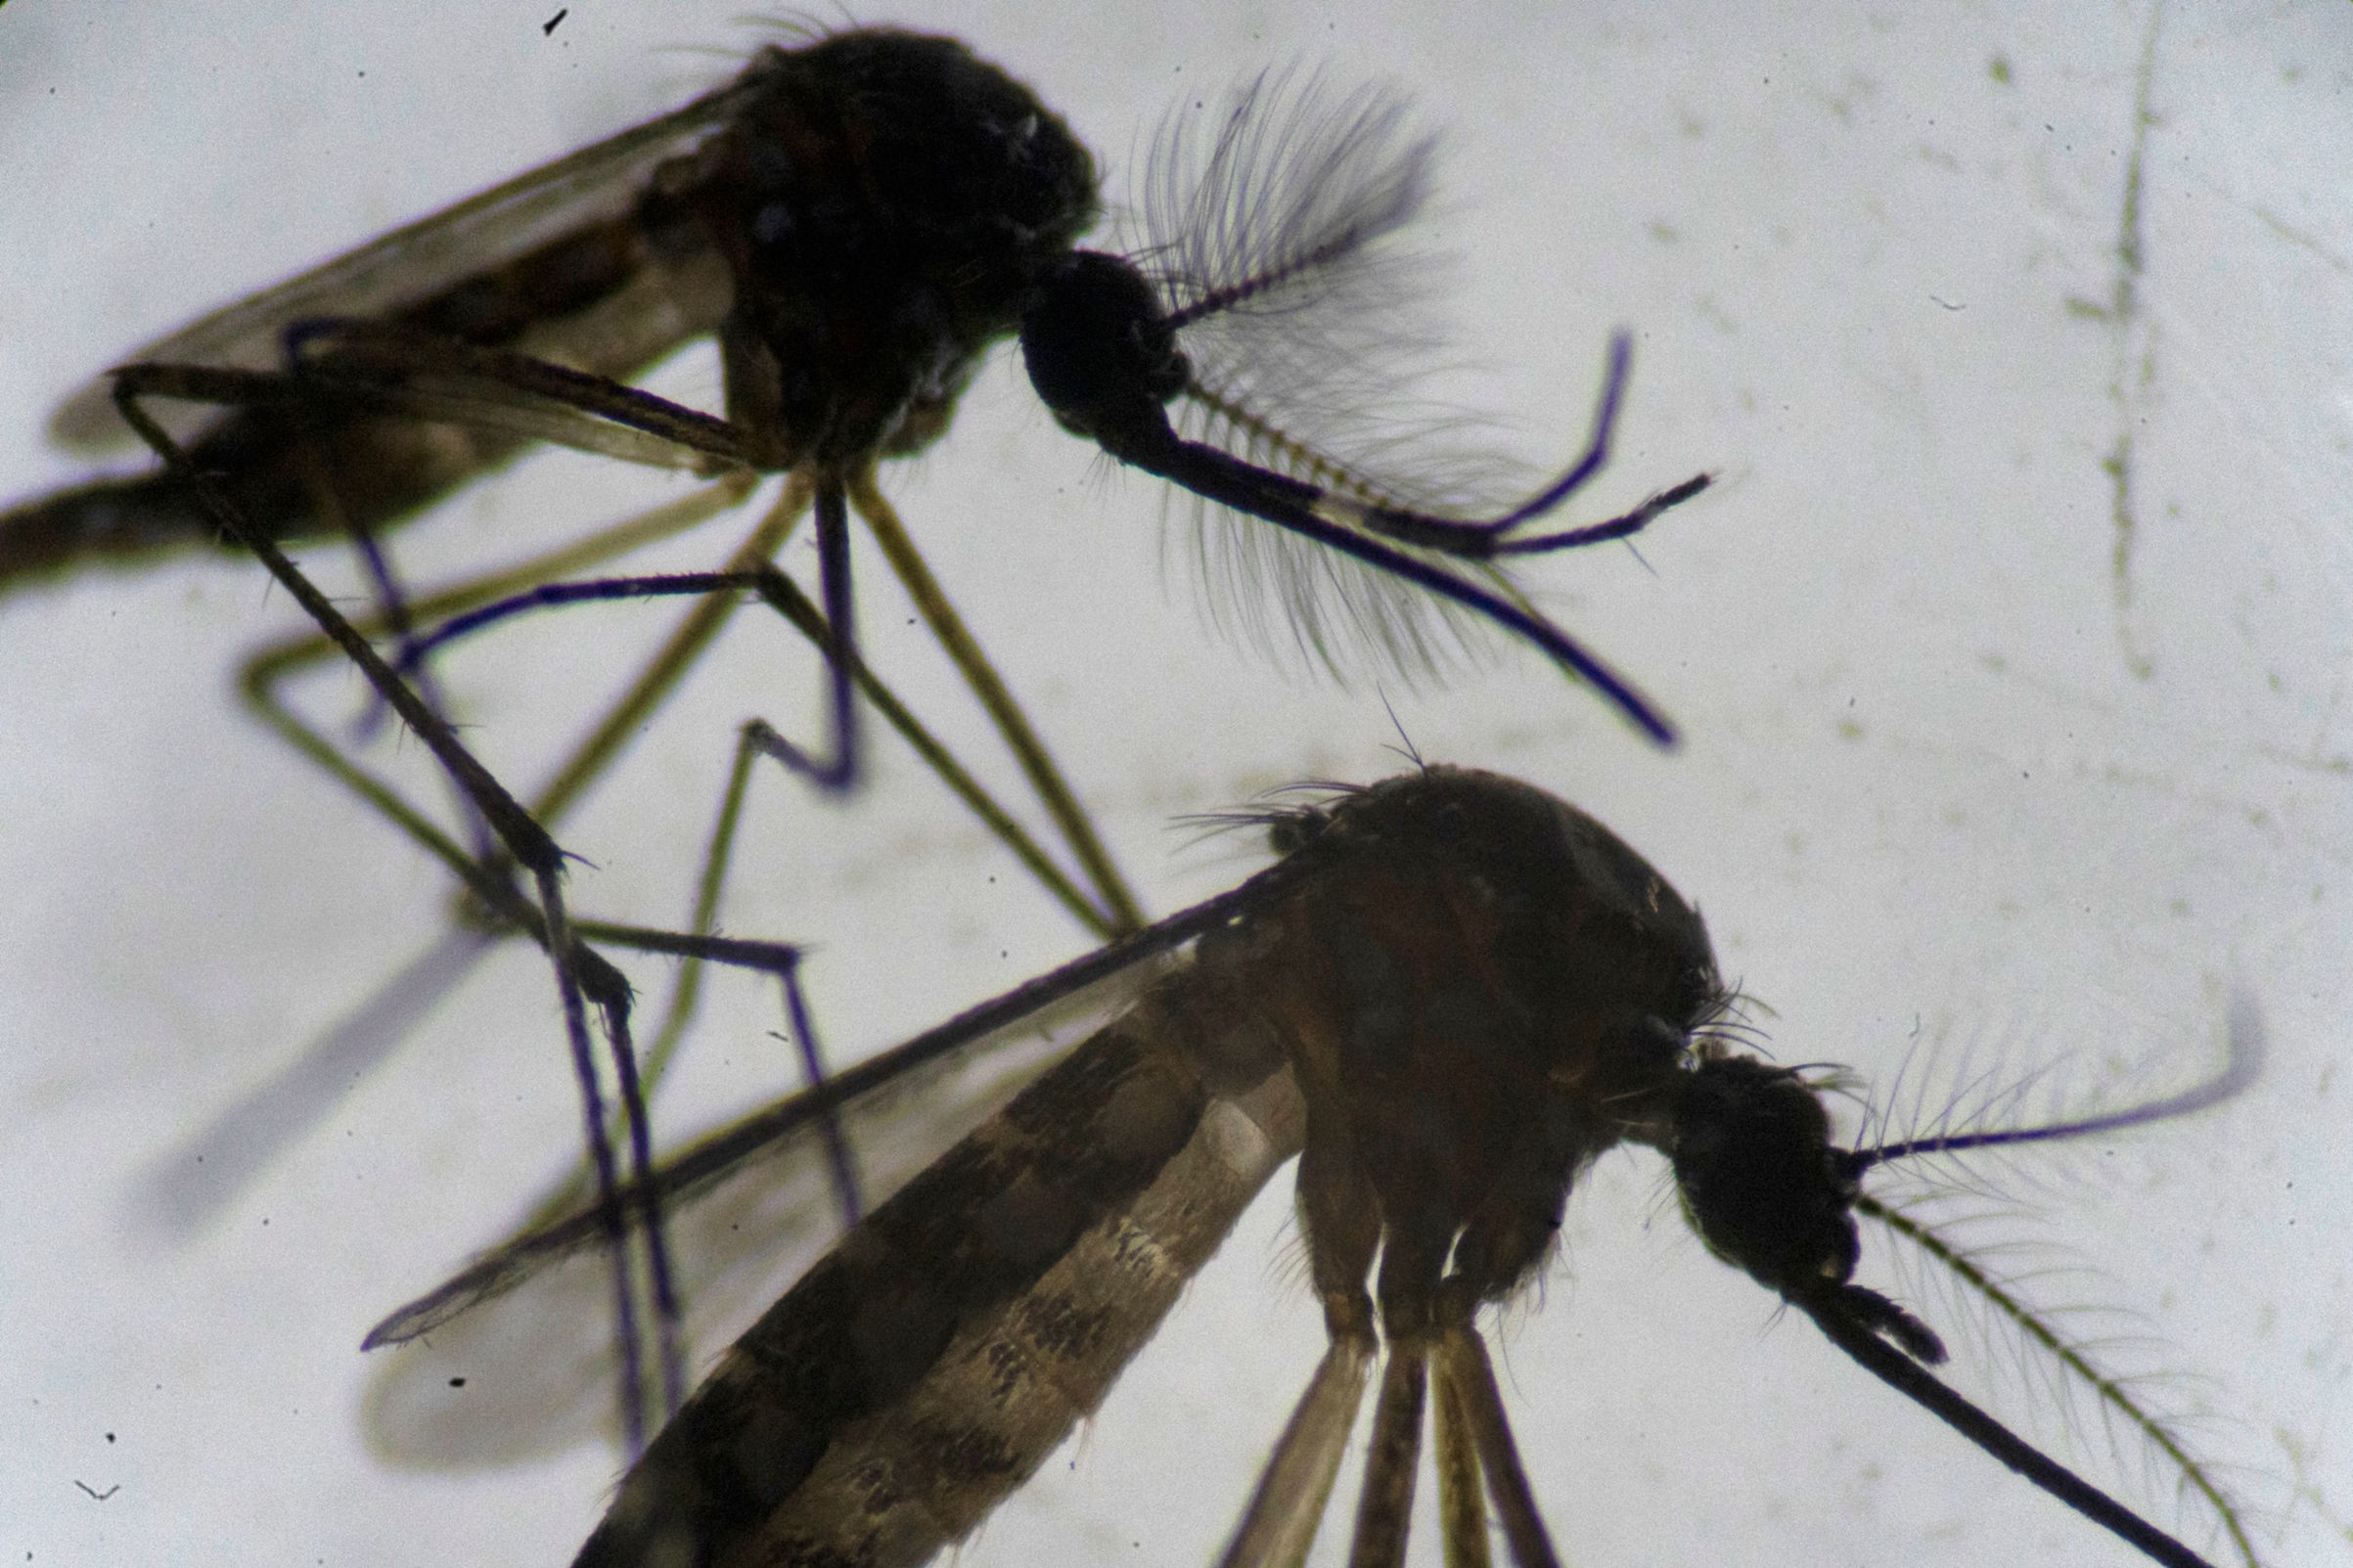 A male (top) and a female (bottom) Aedes aegypti mosquito are seen through a microscope at the Oswaldo Cruz Foundation laboratory in Rio de Janeiro on Aug. 14, 2019. (Mauro Pimentel—AFP/Getty Images)